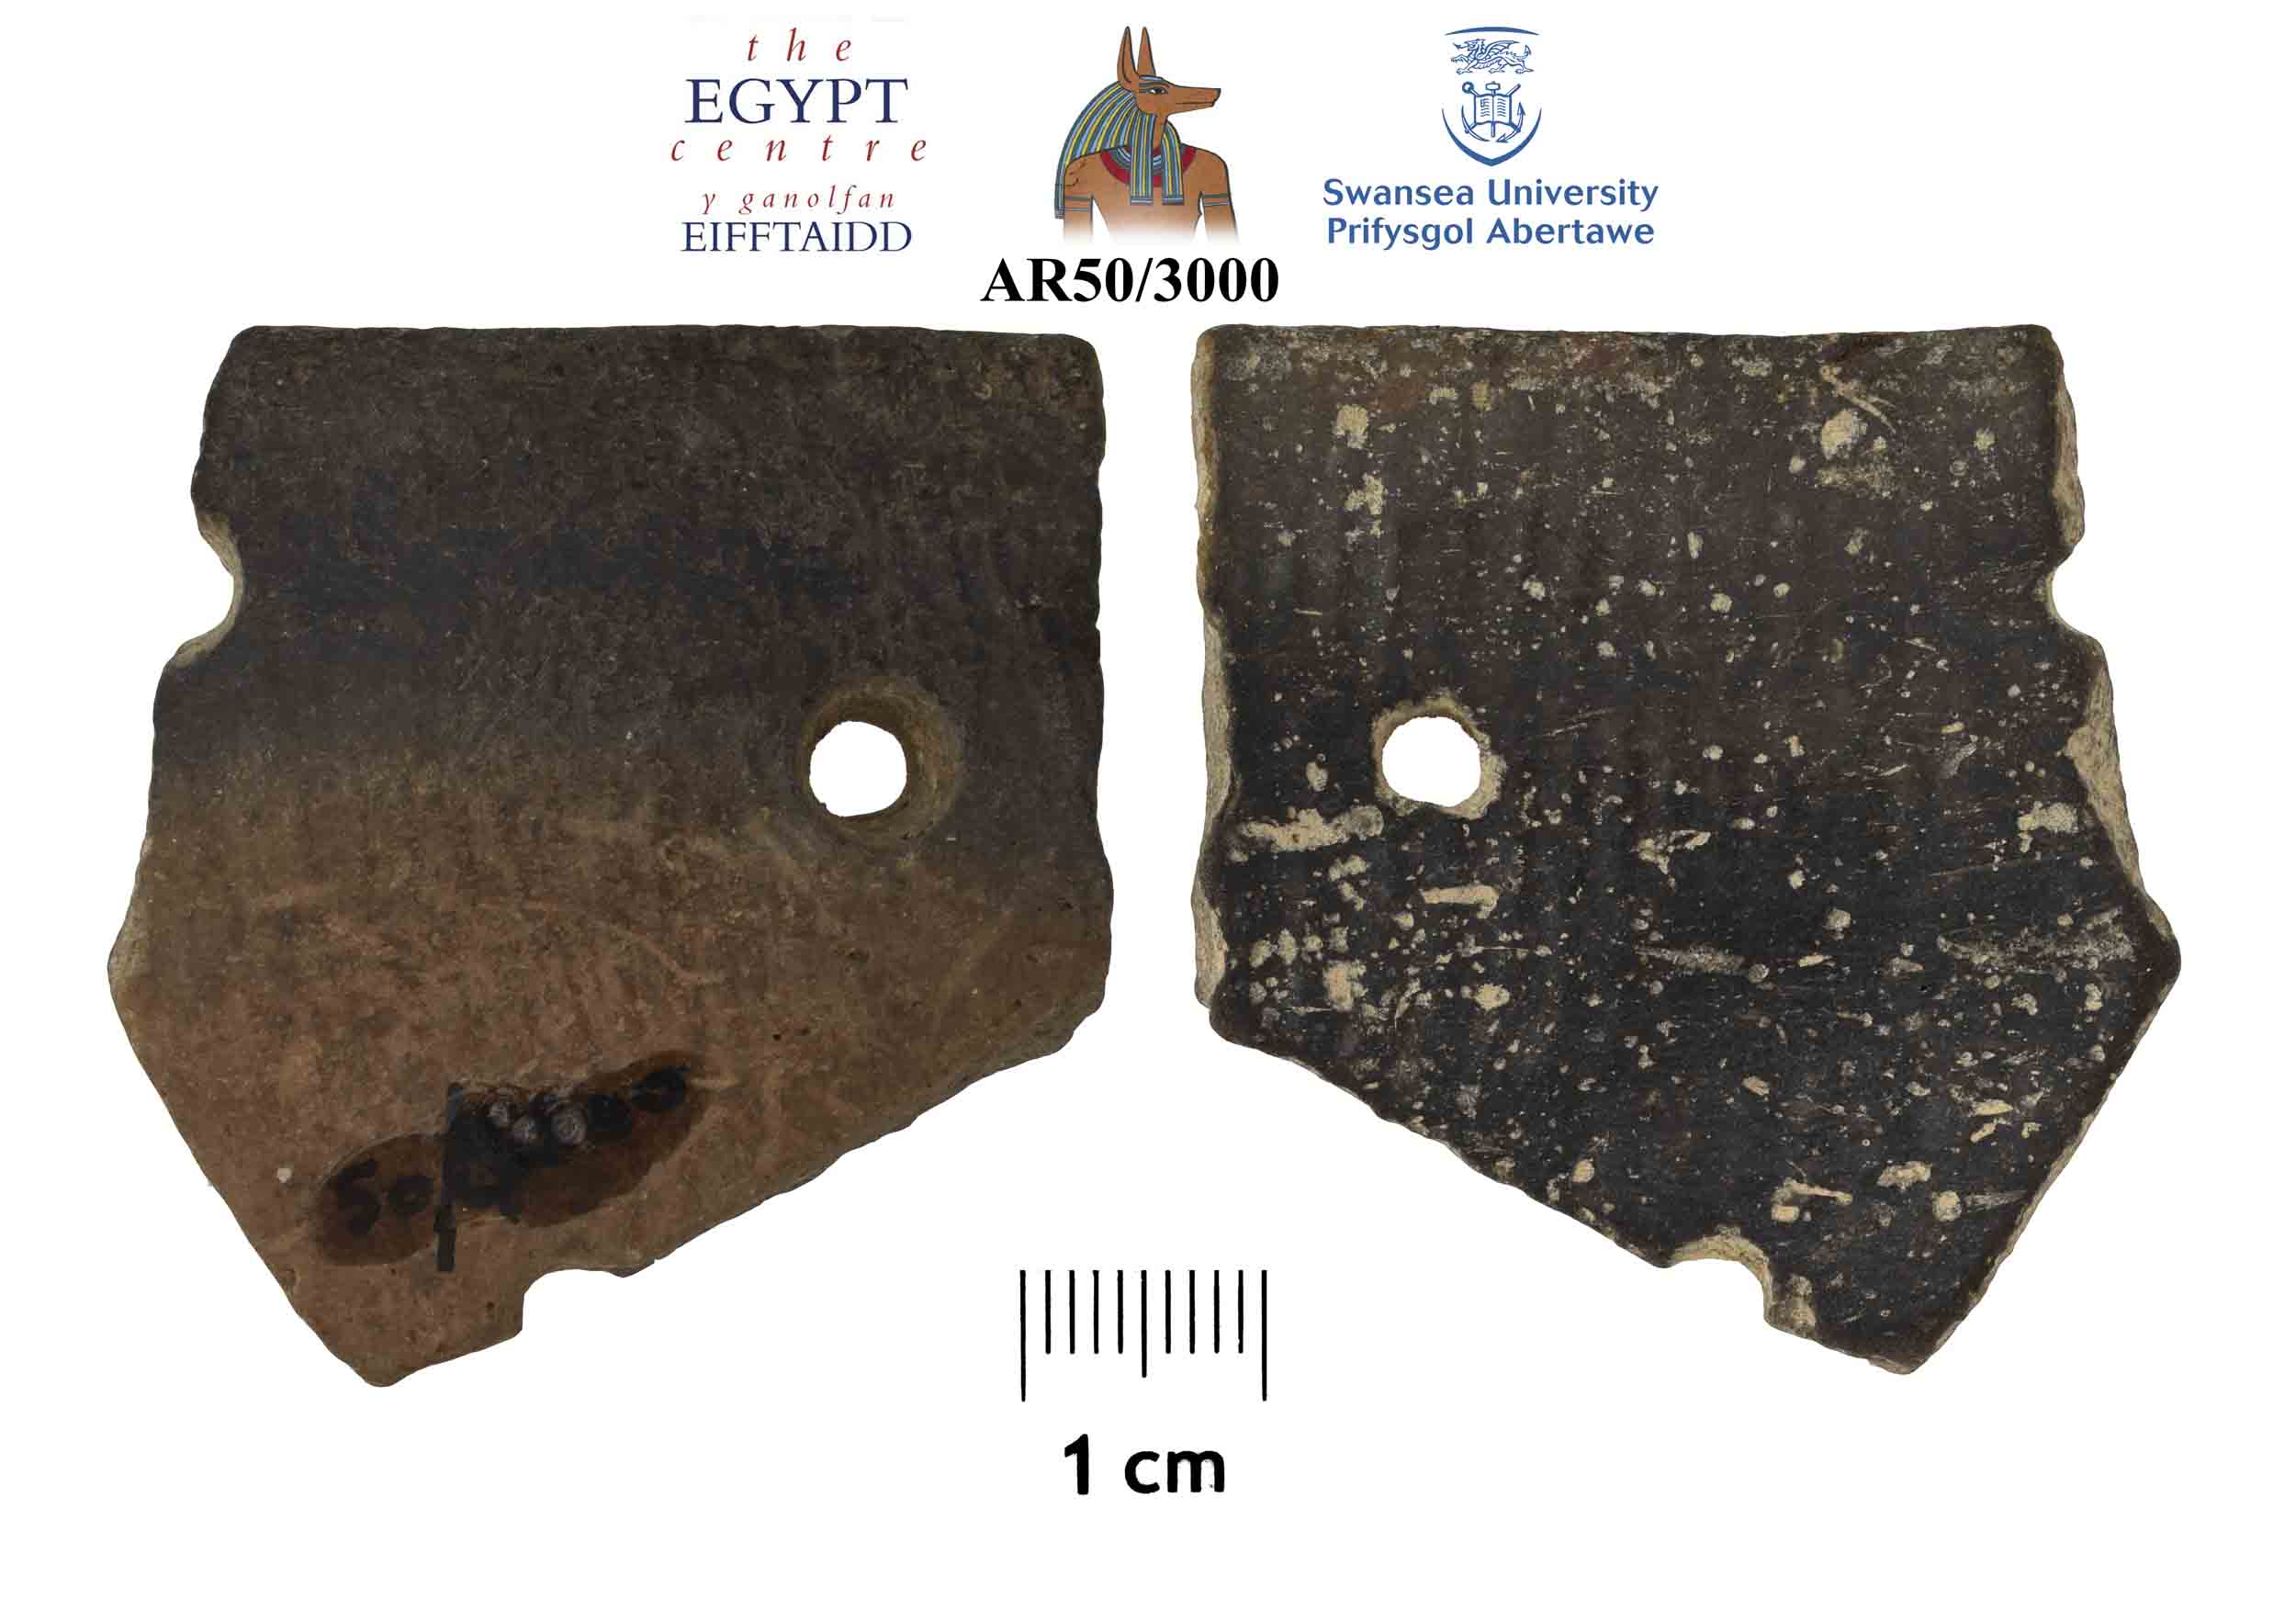 Image for: Rim sherd from a pottery vessel